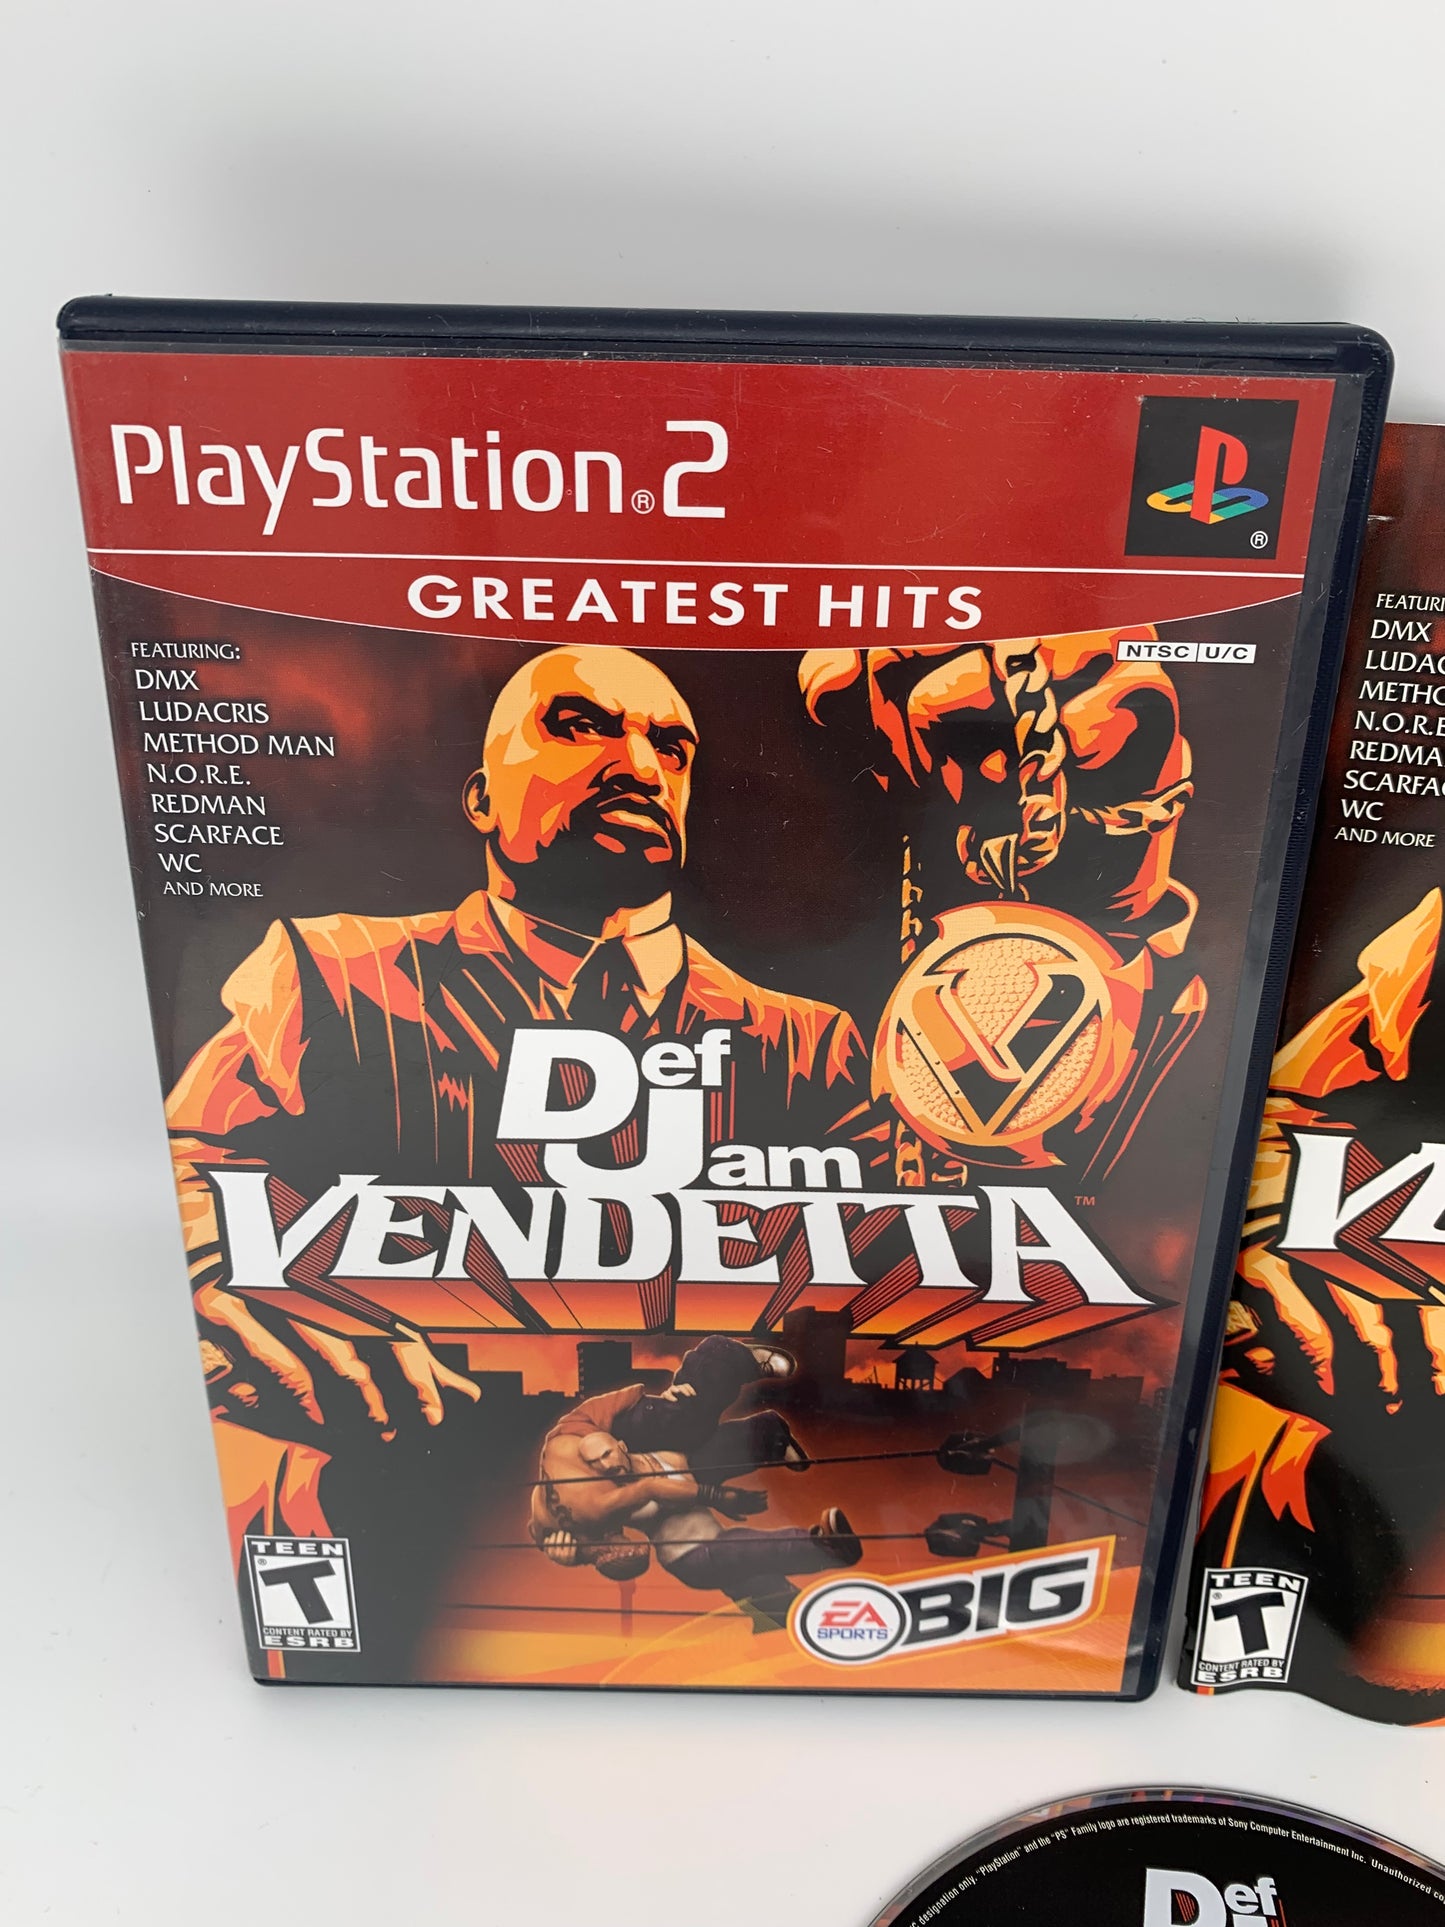 SONY PLAYSTATiON 2 [PS2] | DEF JAM VENDETTA | GREATEST HiTS